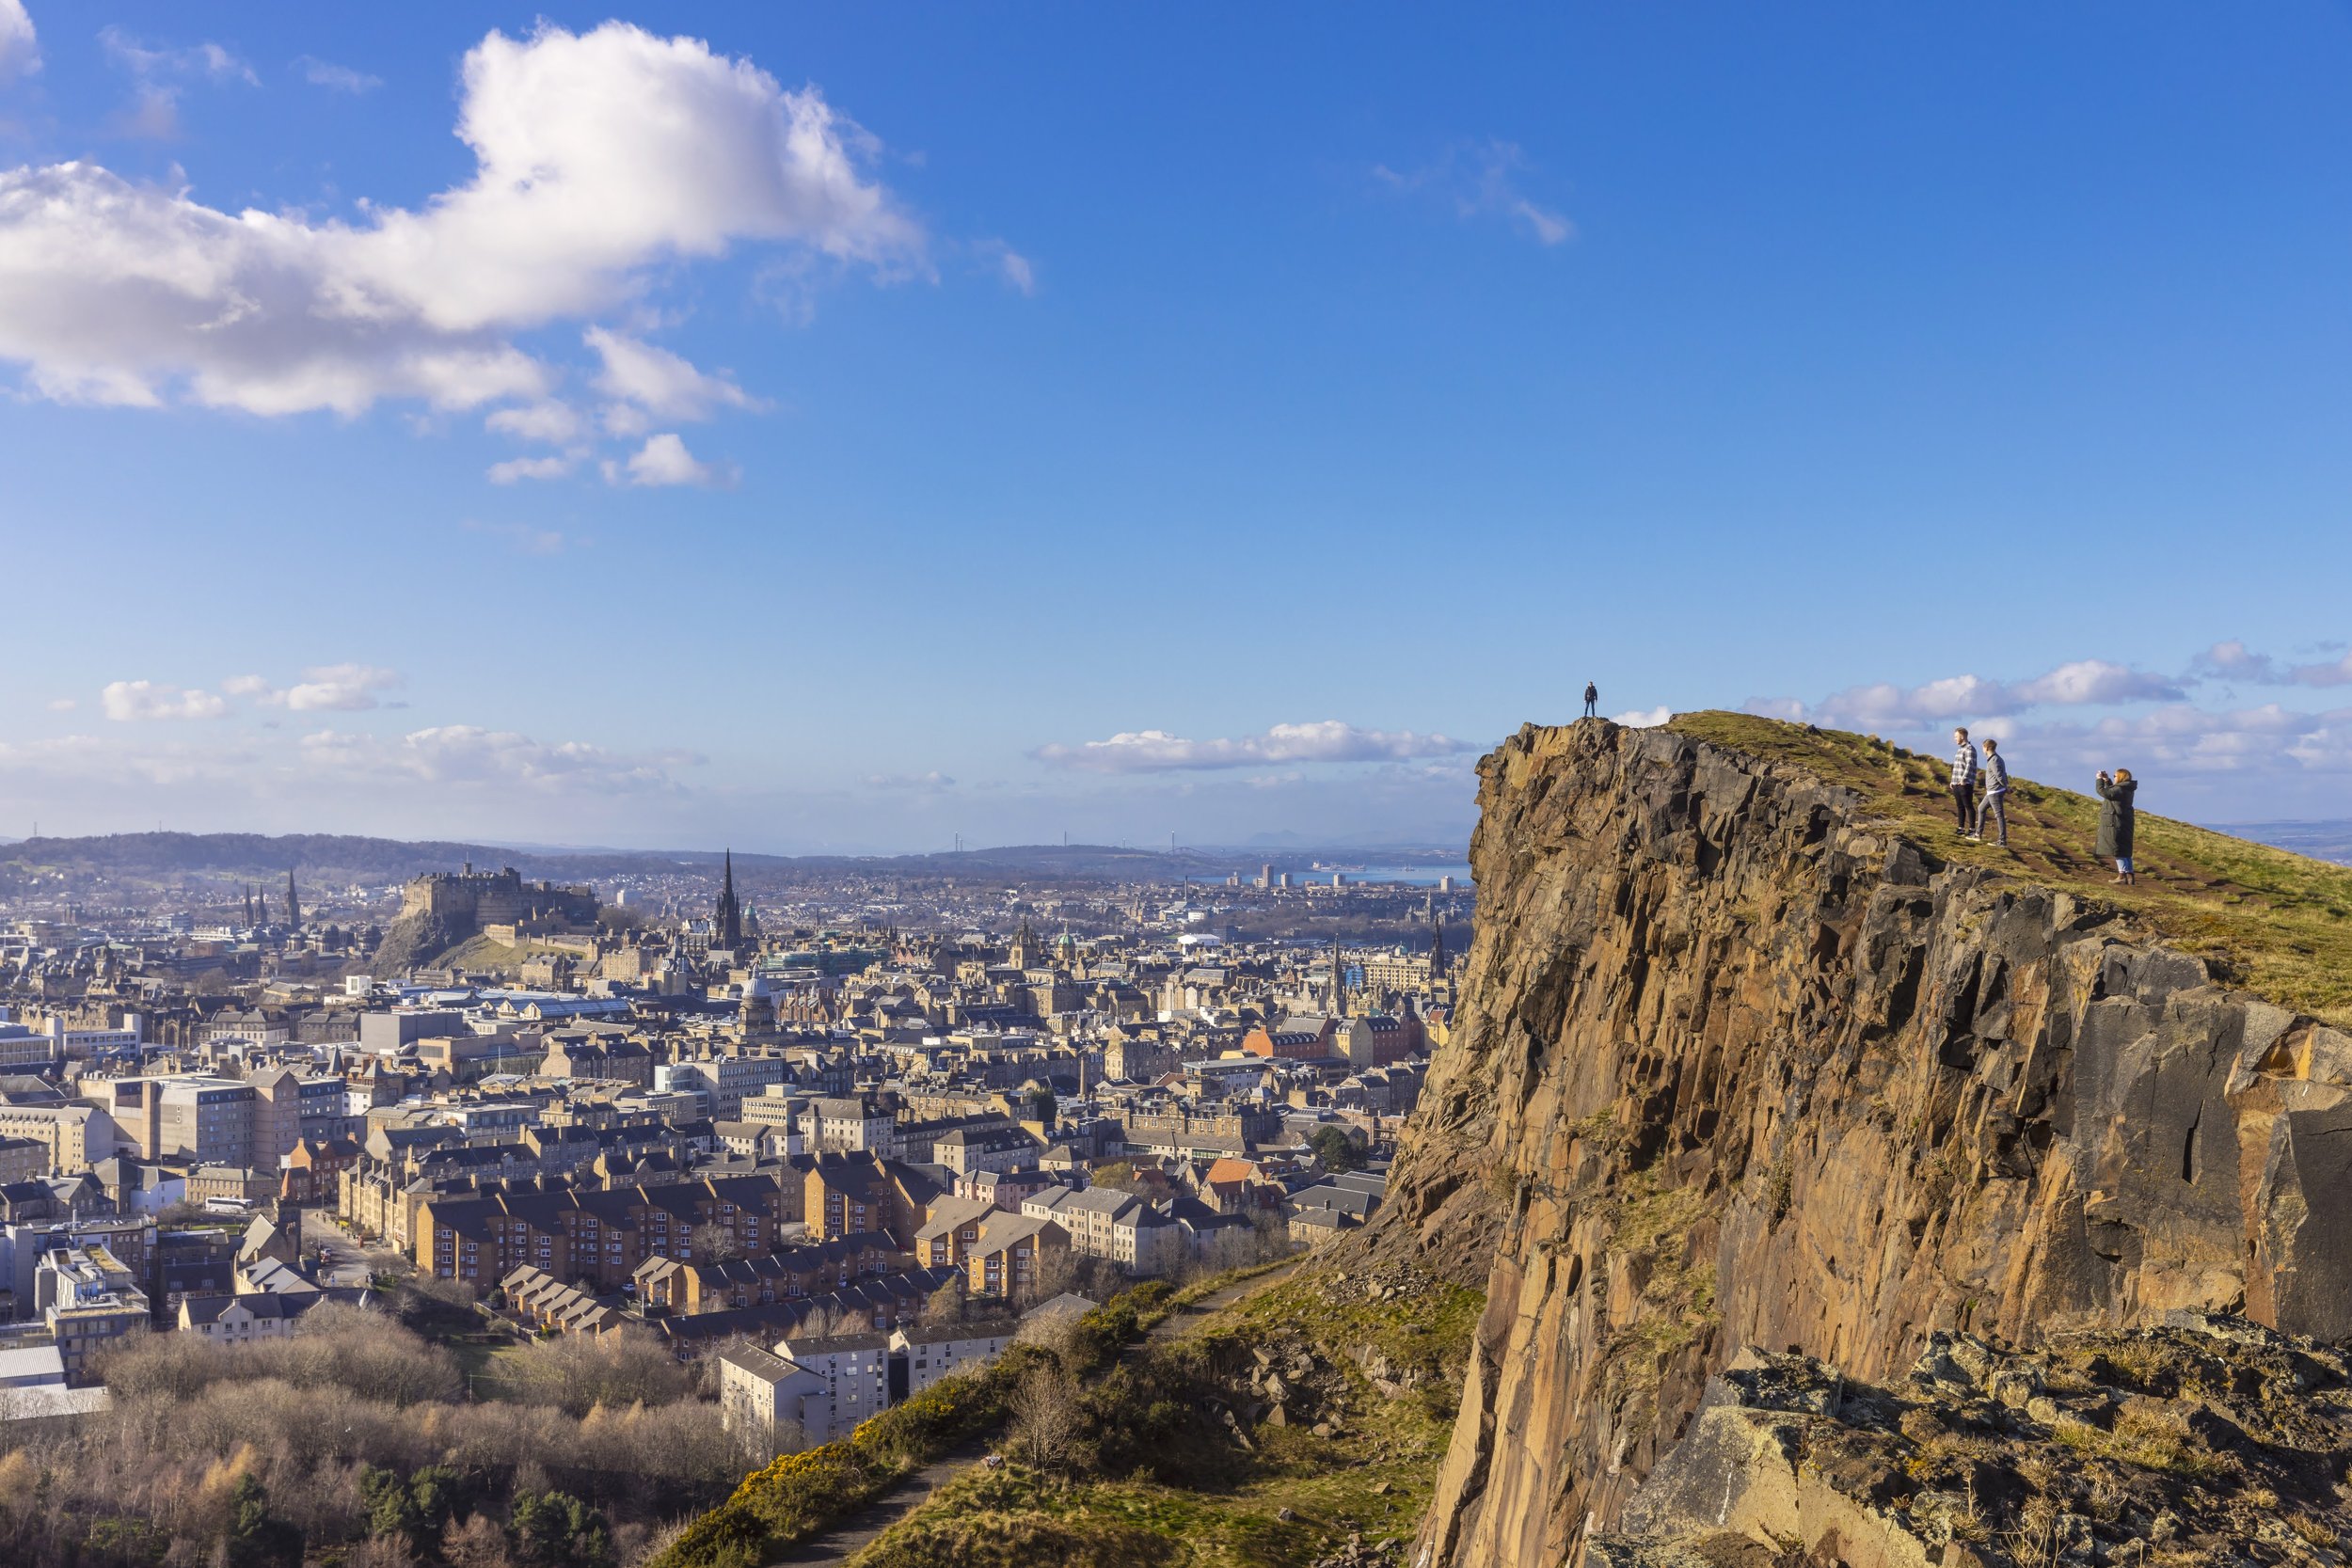  Edinburgh Castle is seen from the Salsibury Crags in Holyrood Park CREDIT VistiScotland, Kenny Lam 